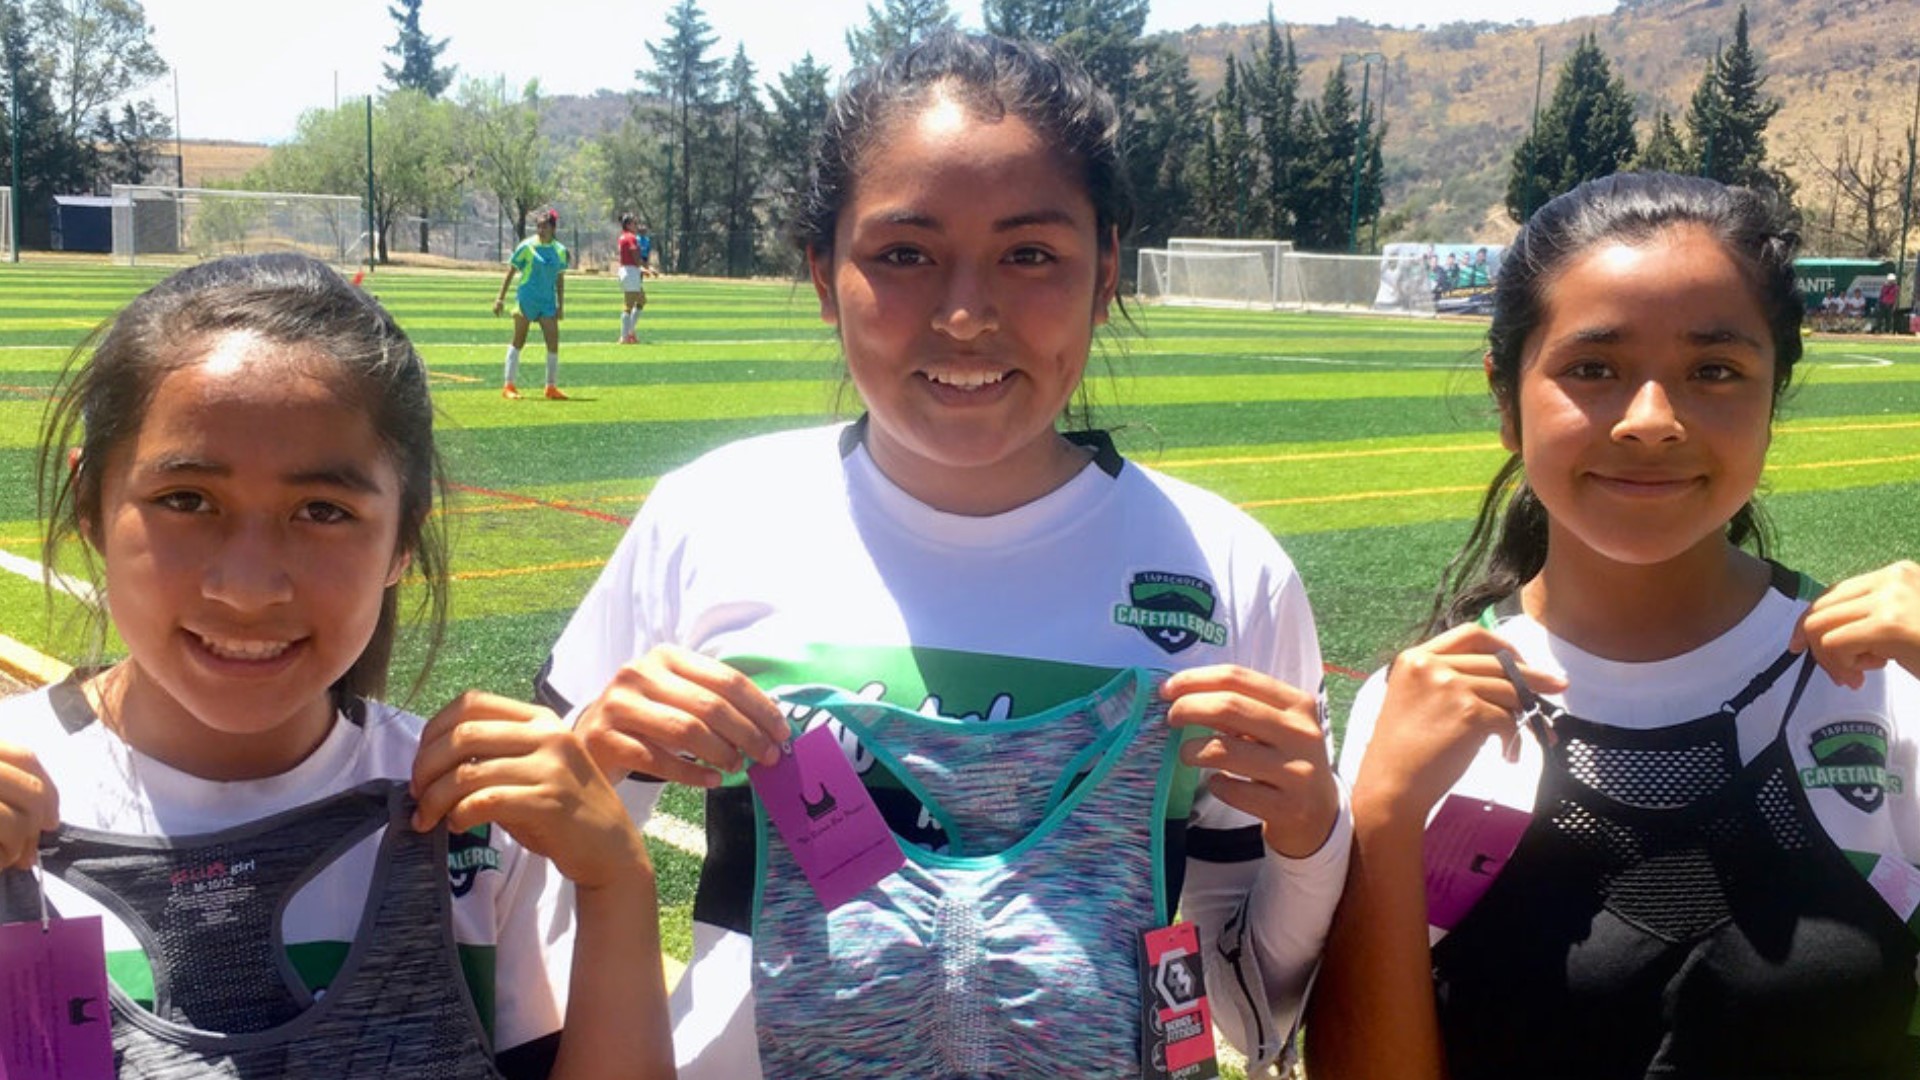 The Sports Bra Project donates sports bras to young athletes who don't have access to them.